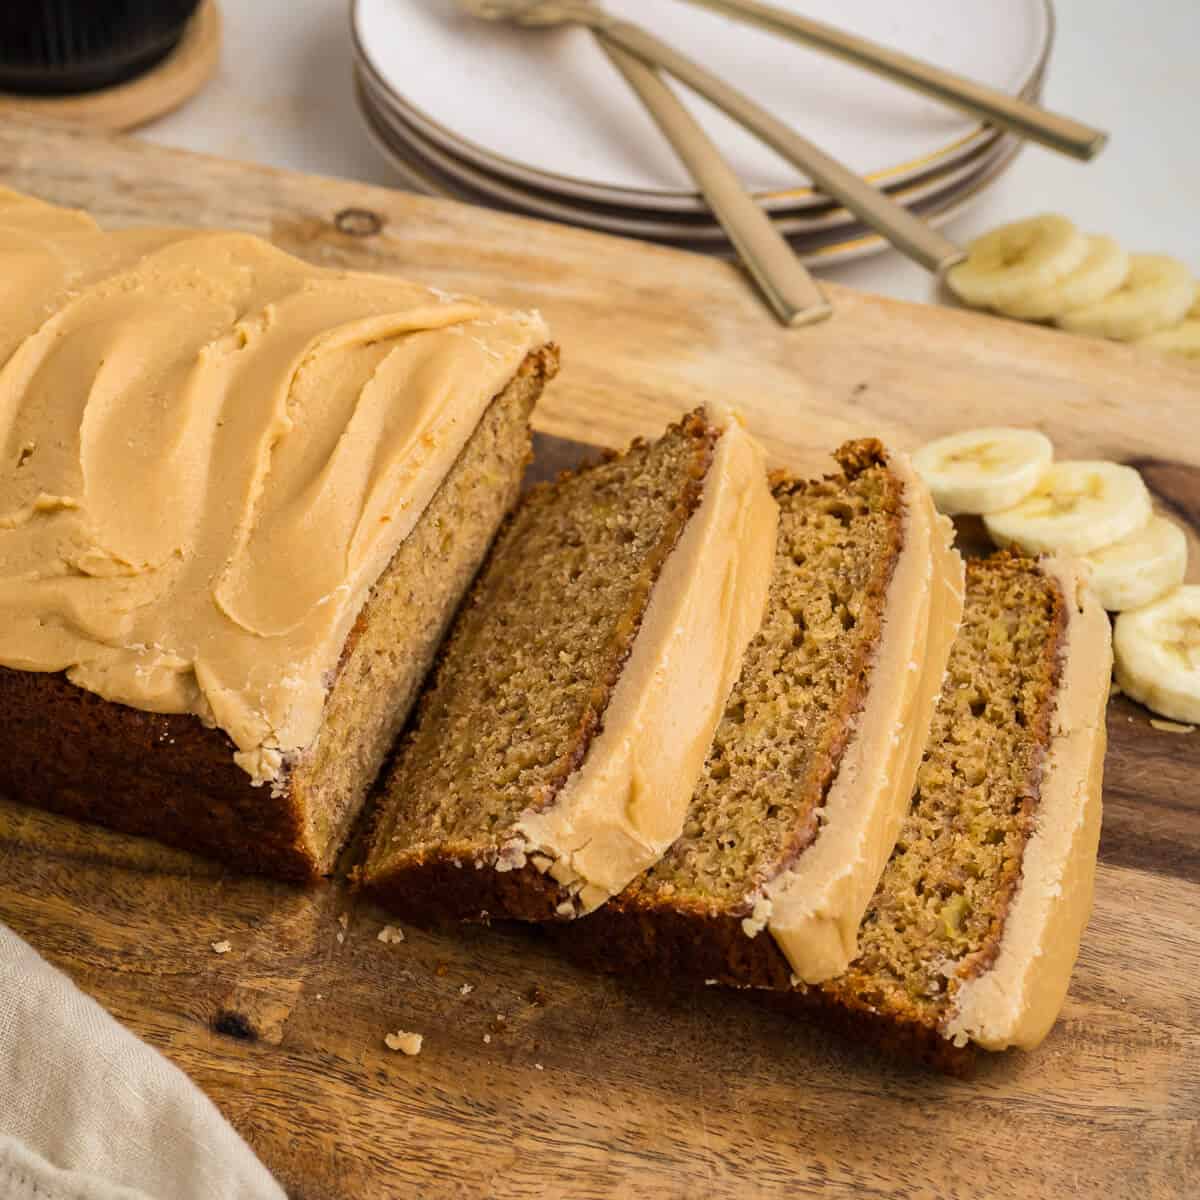 Loaf of banana bread with caramel frosting on top. Three slices have just been cut off the loaf and are laying slightly stacked. There are sliced bananas i the background on the board. There are plates in the background as well.